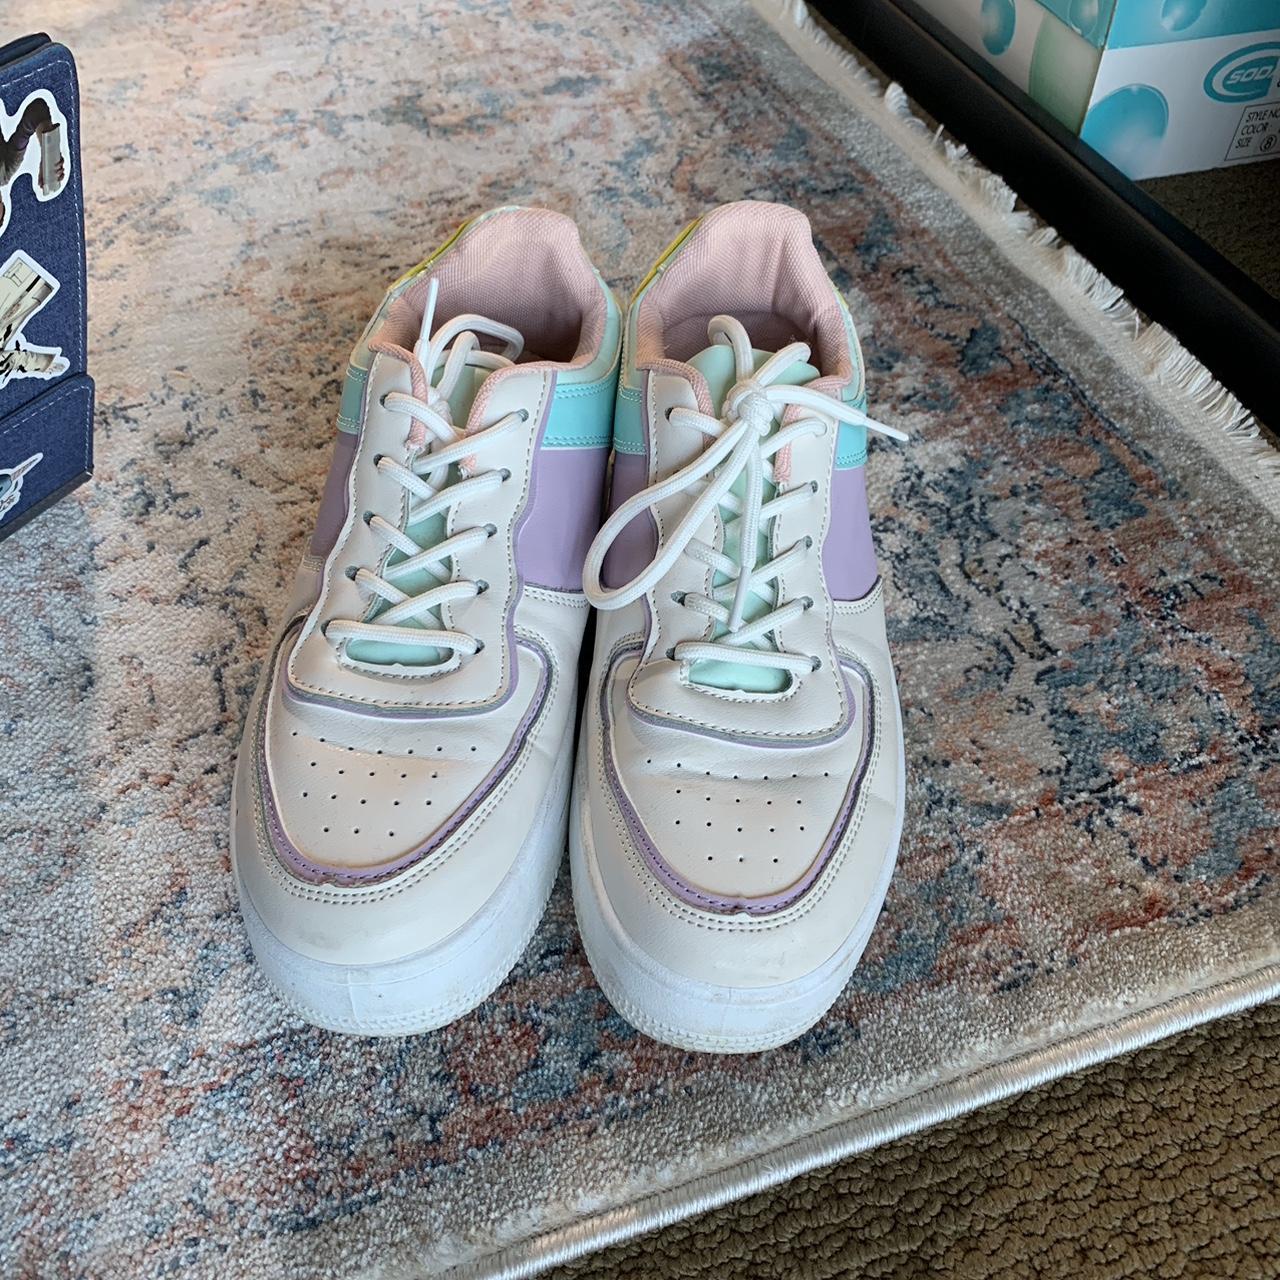 Nasty Gal Women's White and Pink Trainers